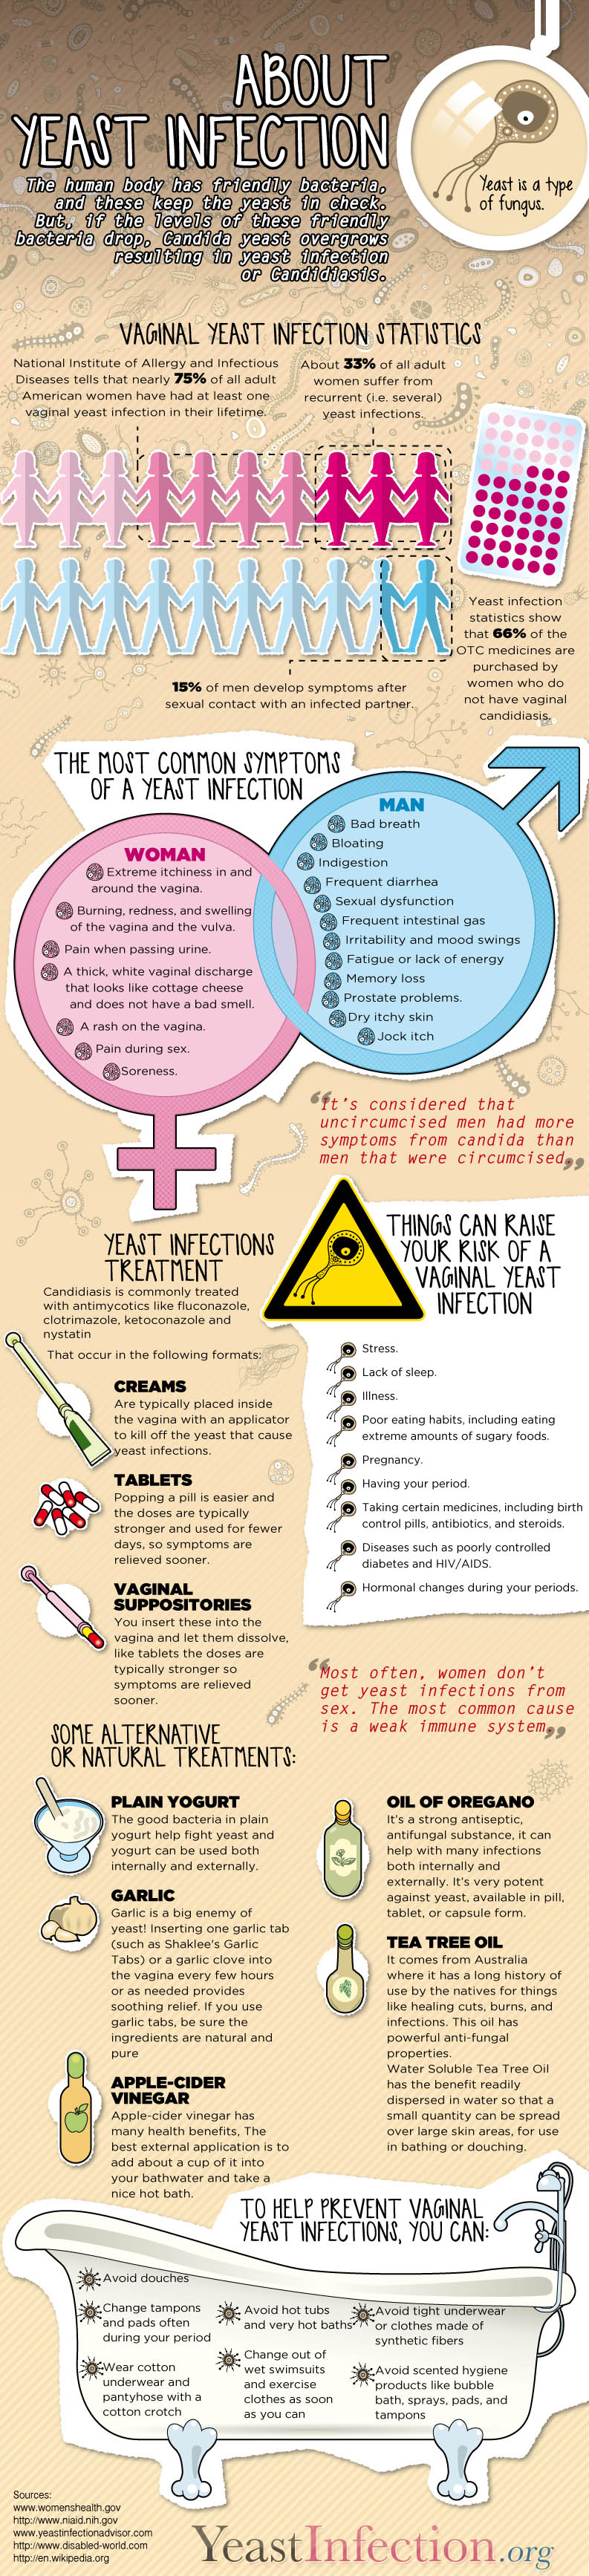 Interesting Facts About Yeast Infections